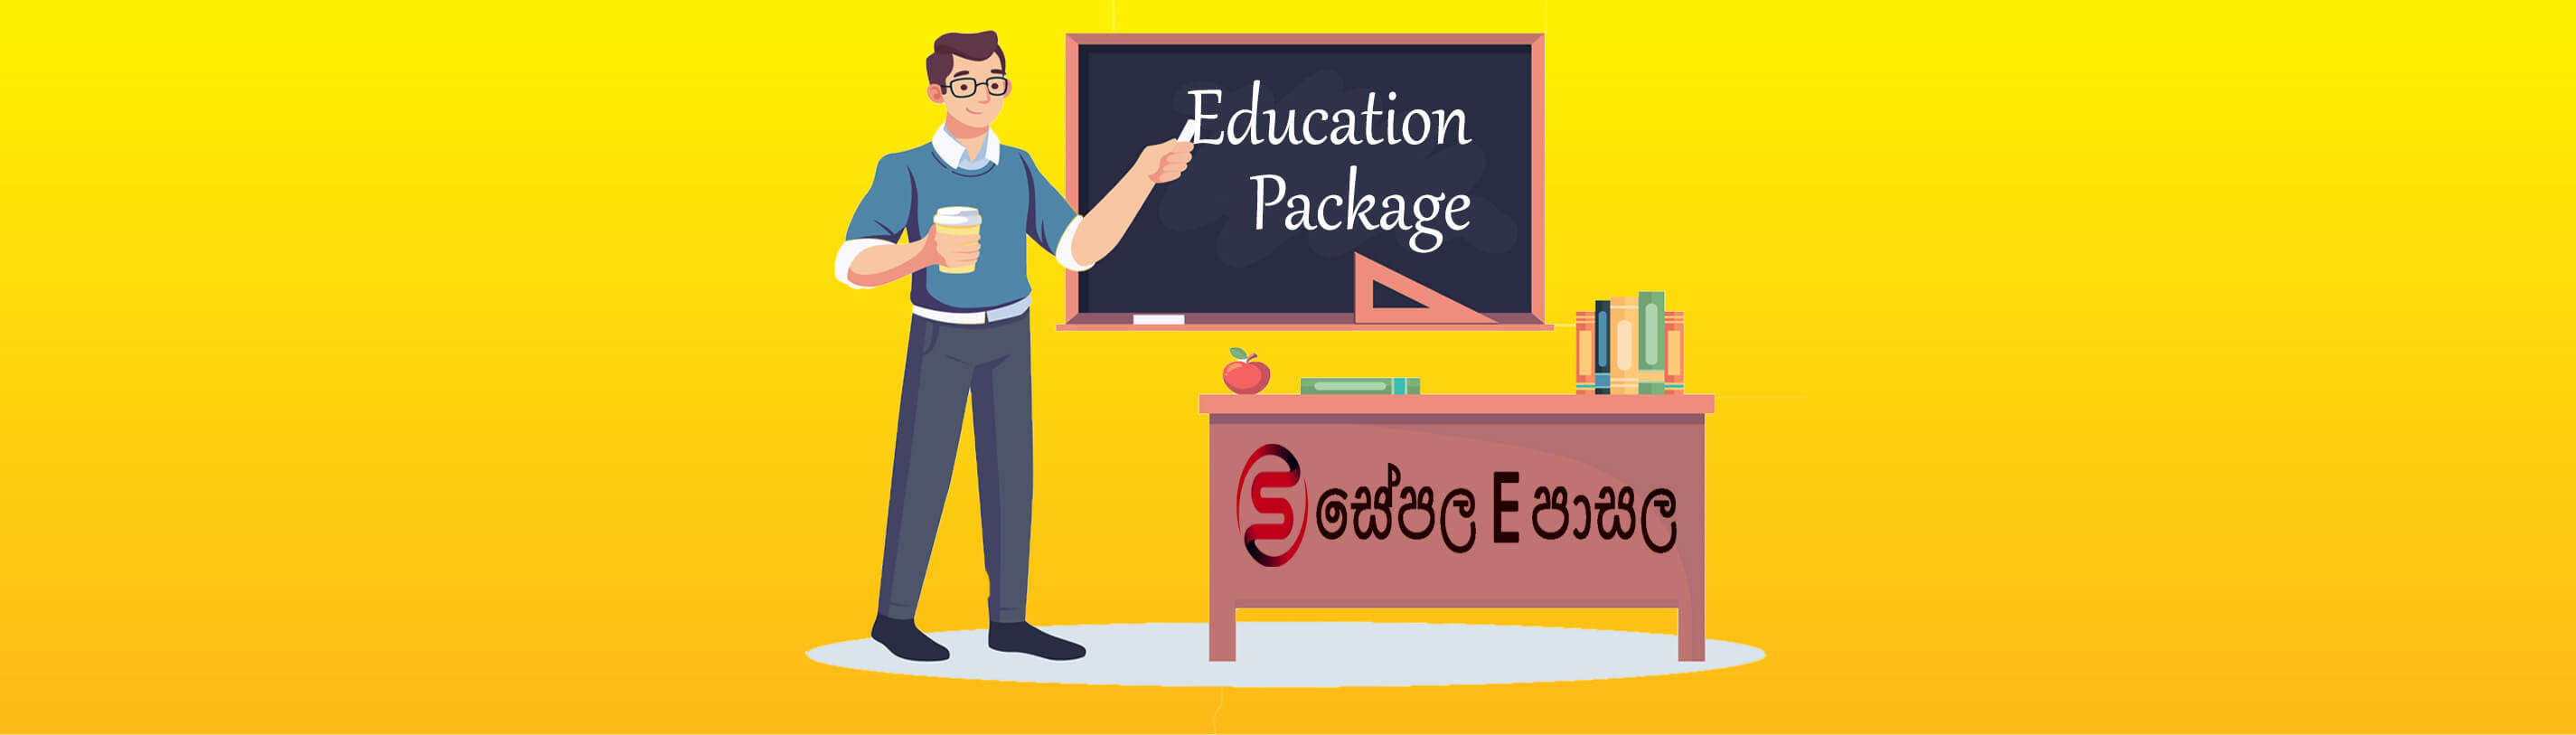 education package